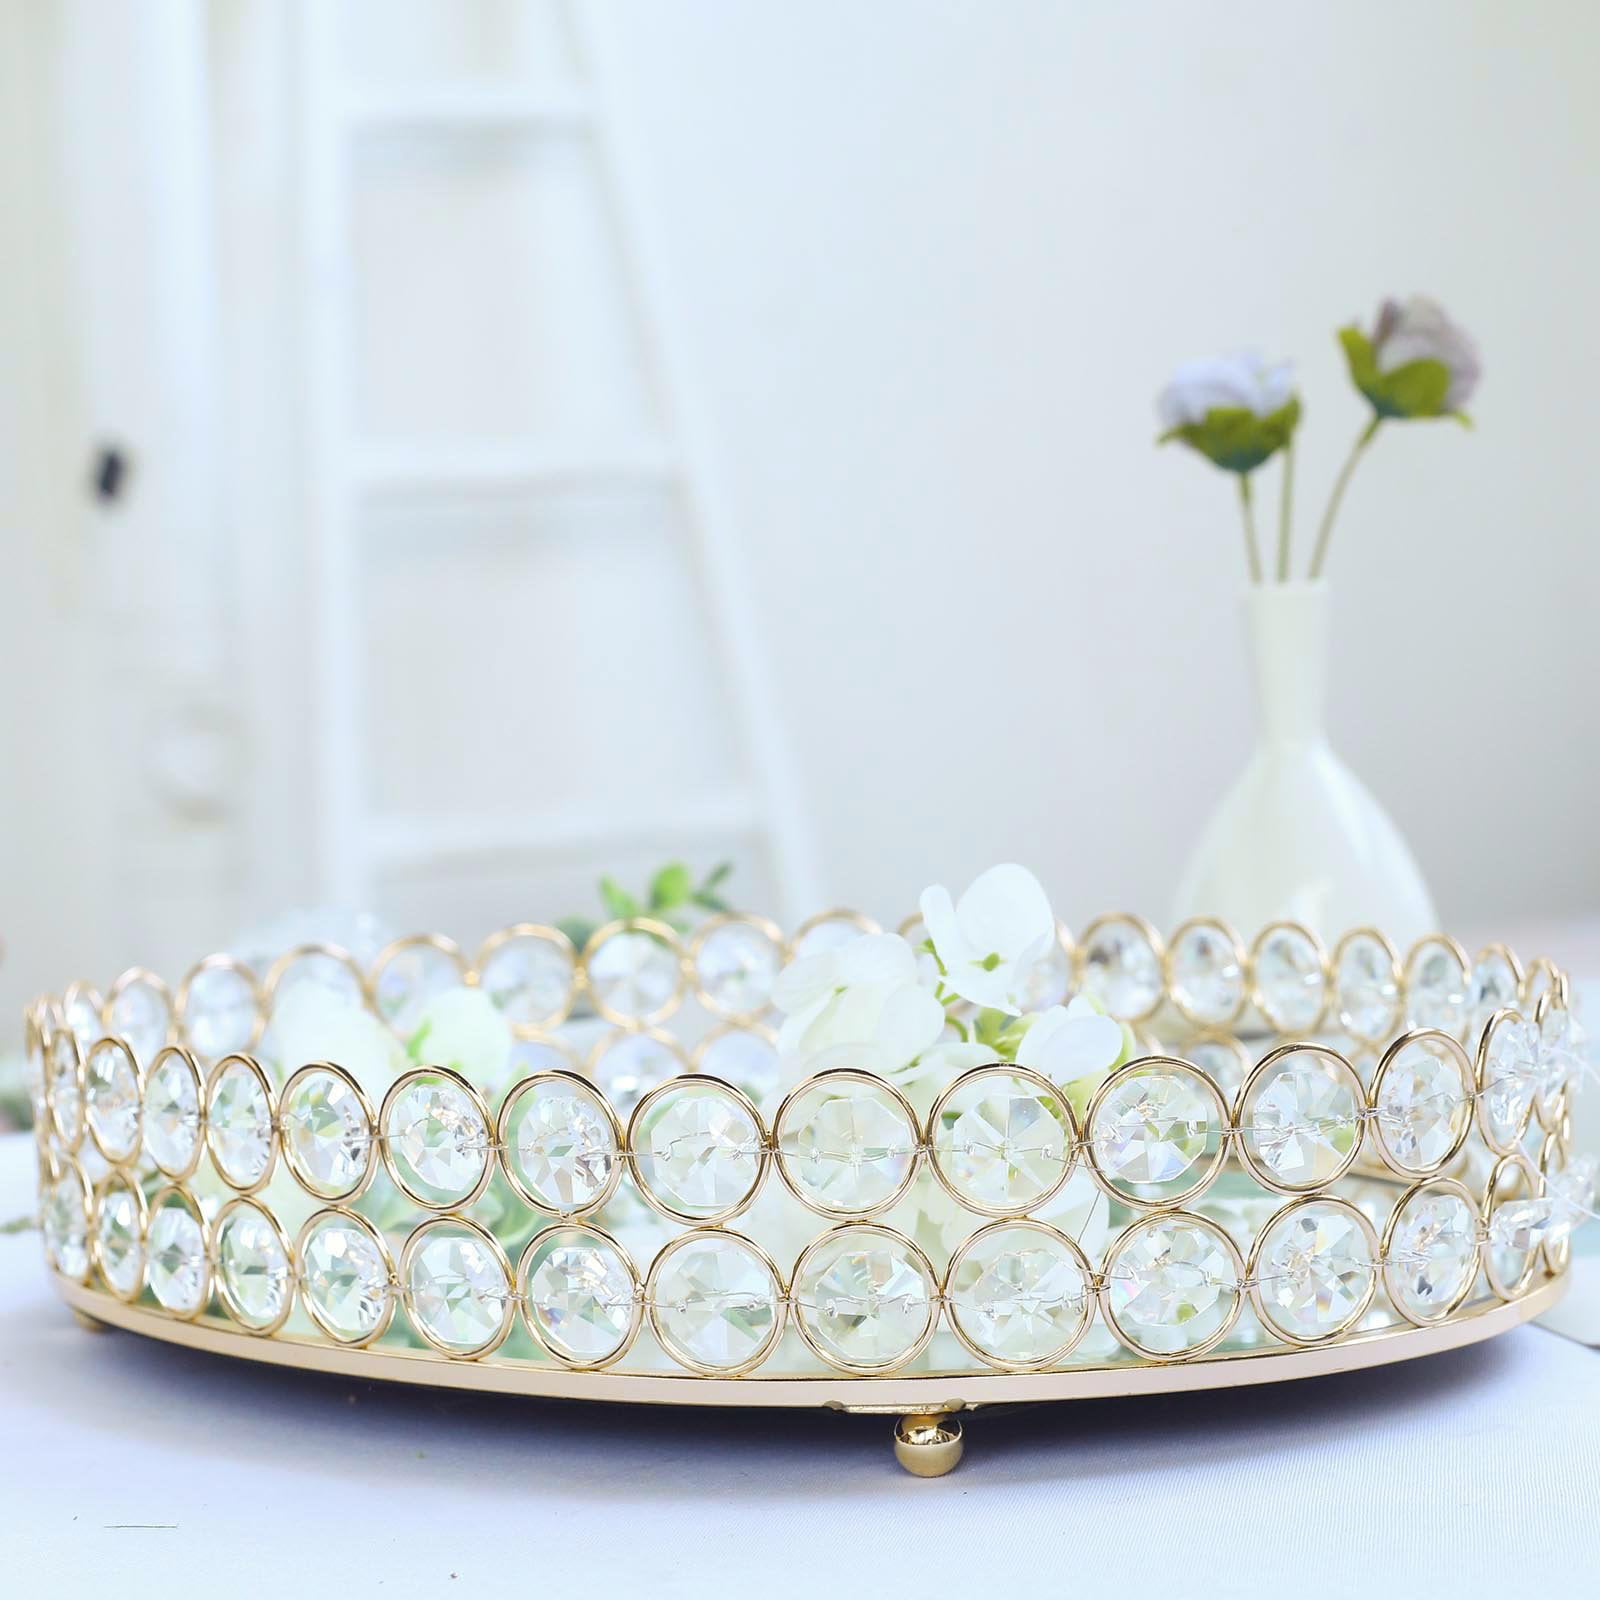 GOLD 14"x10" Metal Crystal Beaded Oval Mirror Serving Tray Wedding  Supplies 